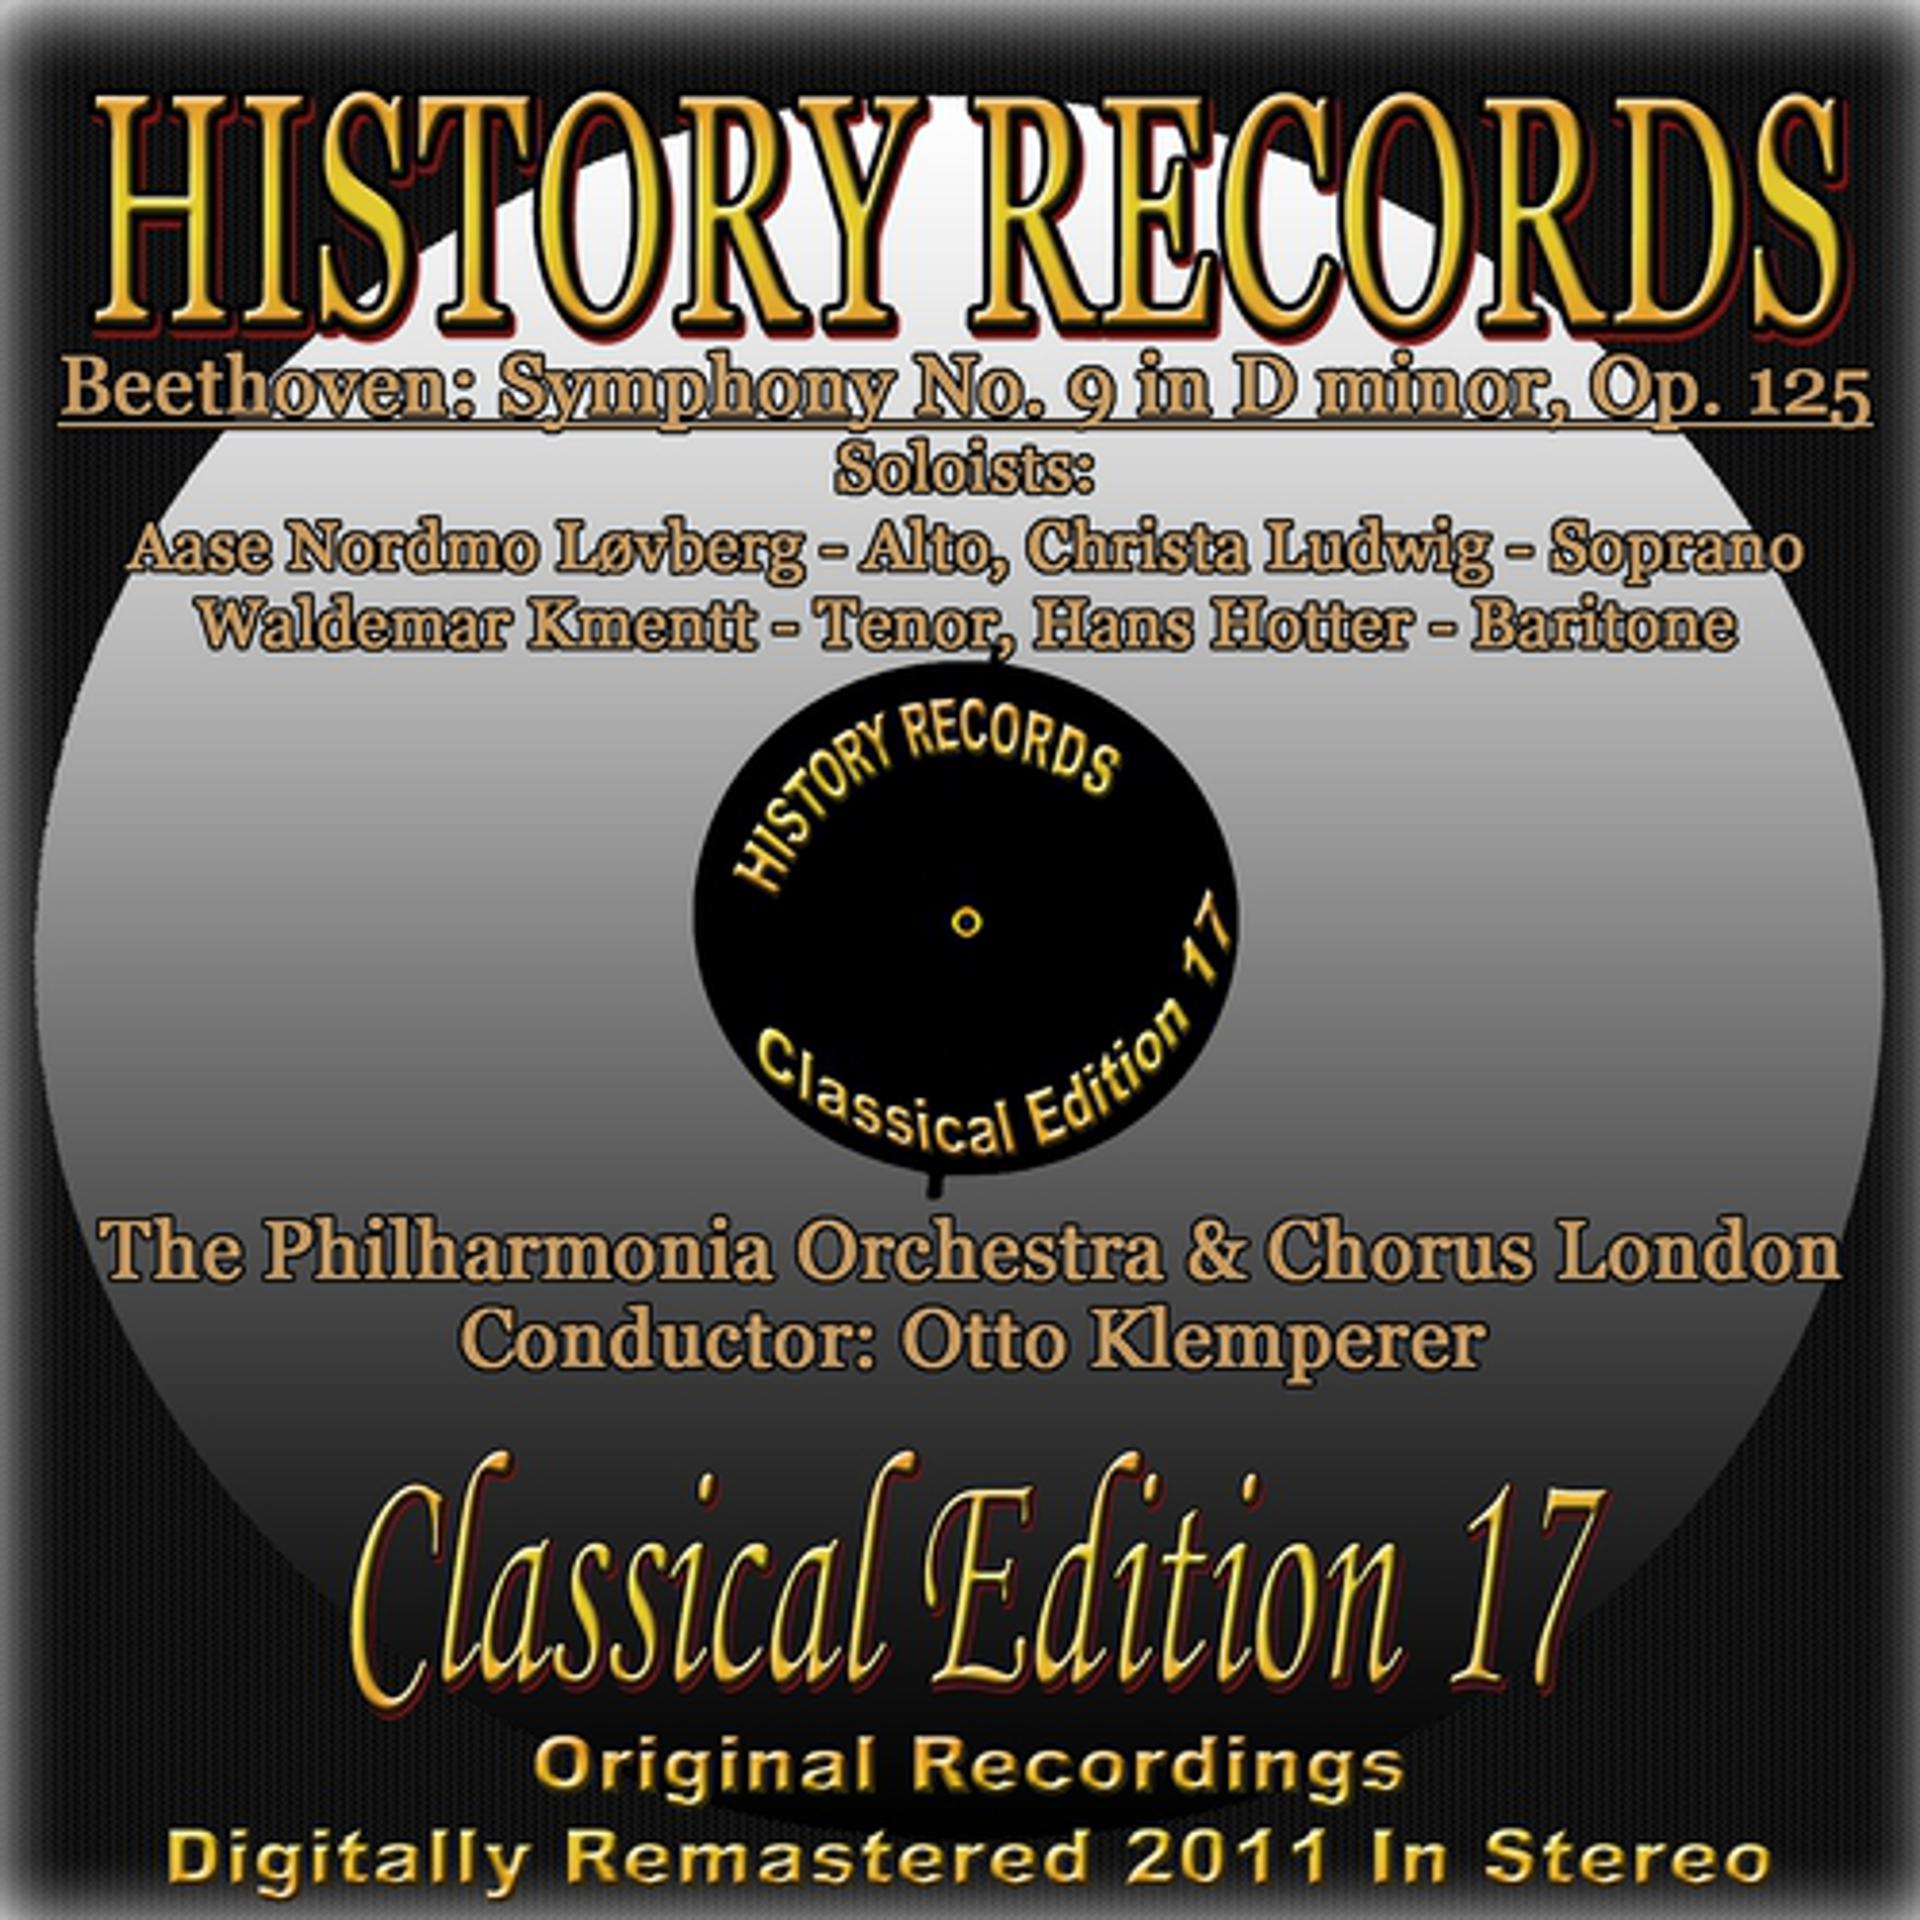 Постер альбома Beethoven: Symphony No. 9, in D Minor, Op. 125 (History Records - Classical Edition 17 - Original Recordings Digitally Remastered 2011 in Stereo)